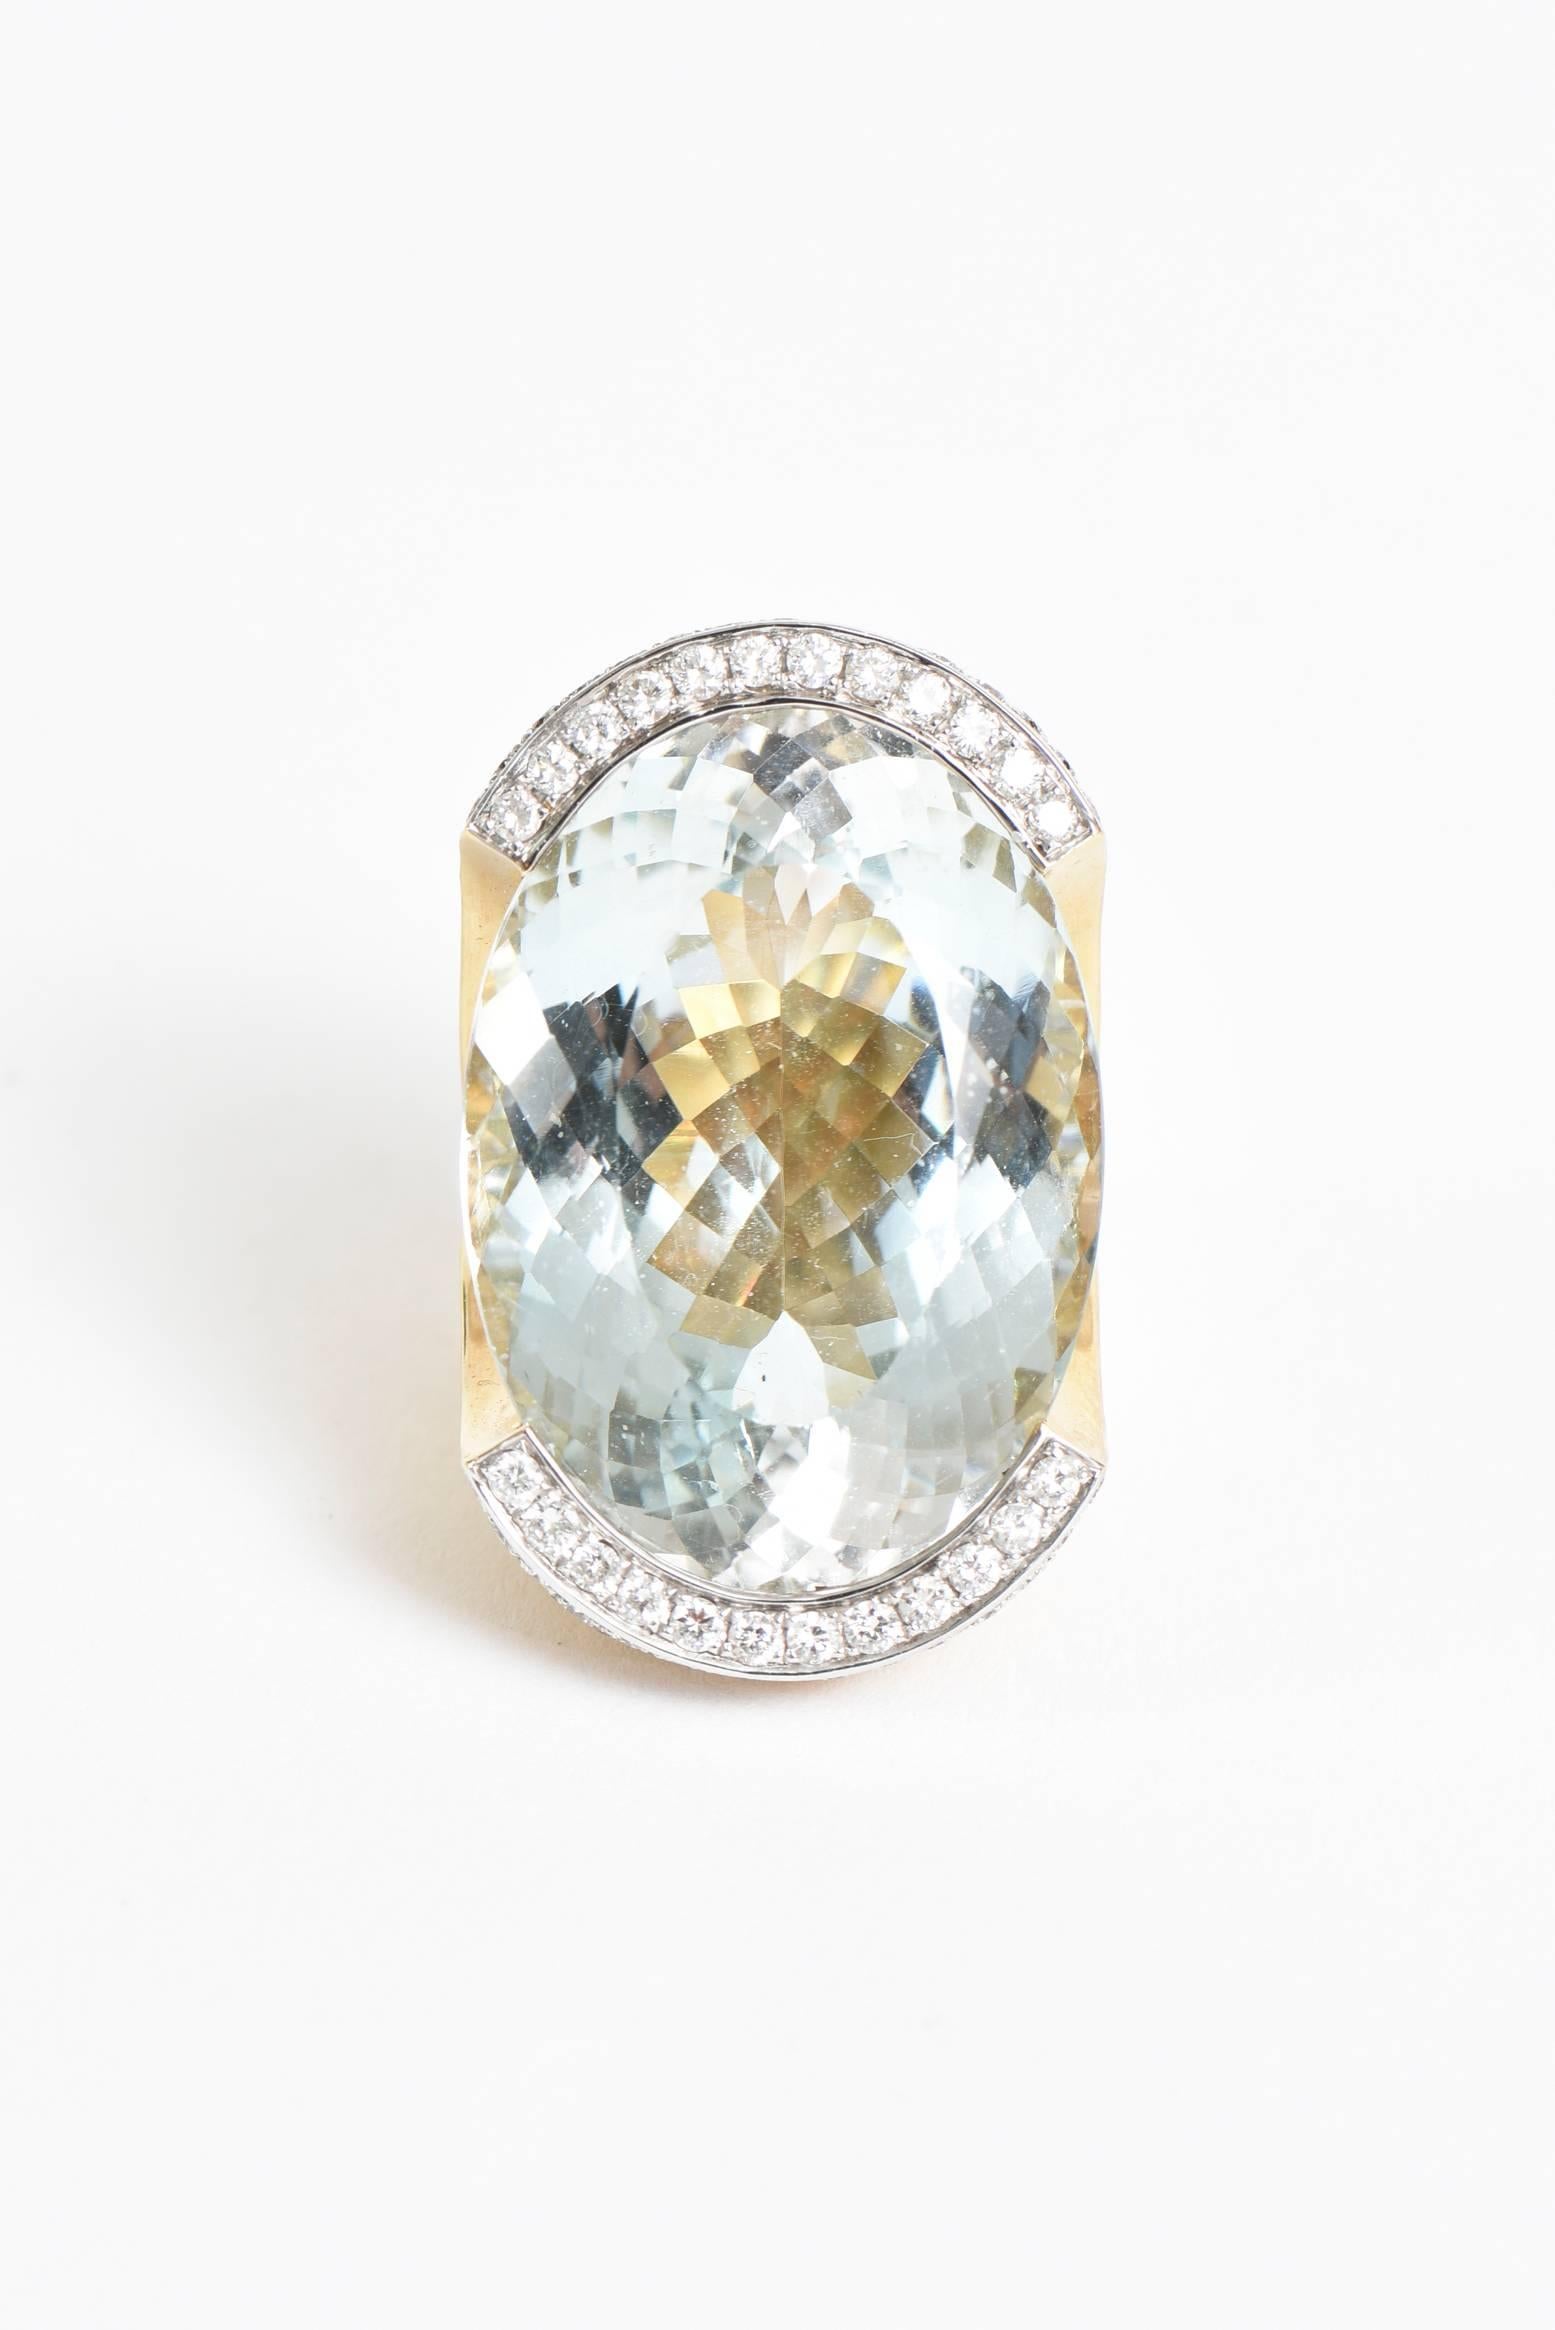 This custom made stellar monumental cocktail ring that is a brilliant aquamarine of a light blue color, !8K Satin Gold and Diamonds has great presence.. The aquamarine is  approx. 78.6 in carats that is mounted in a heavy made modernist 18K gold